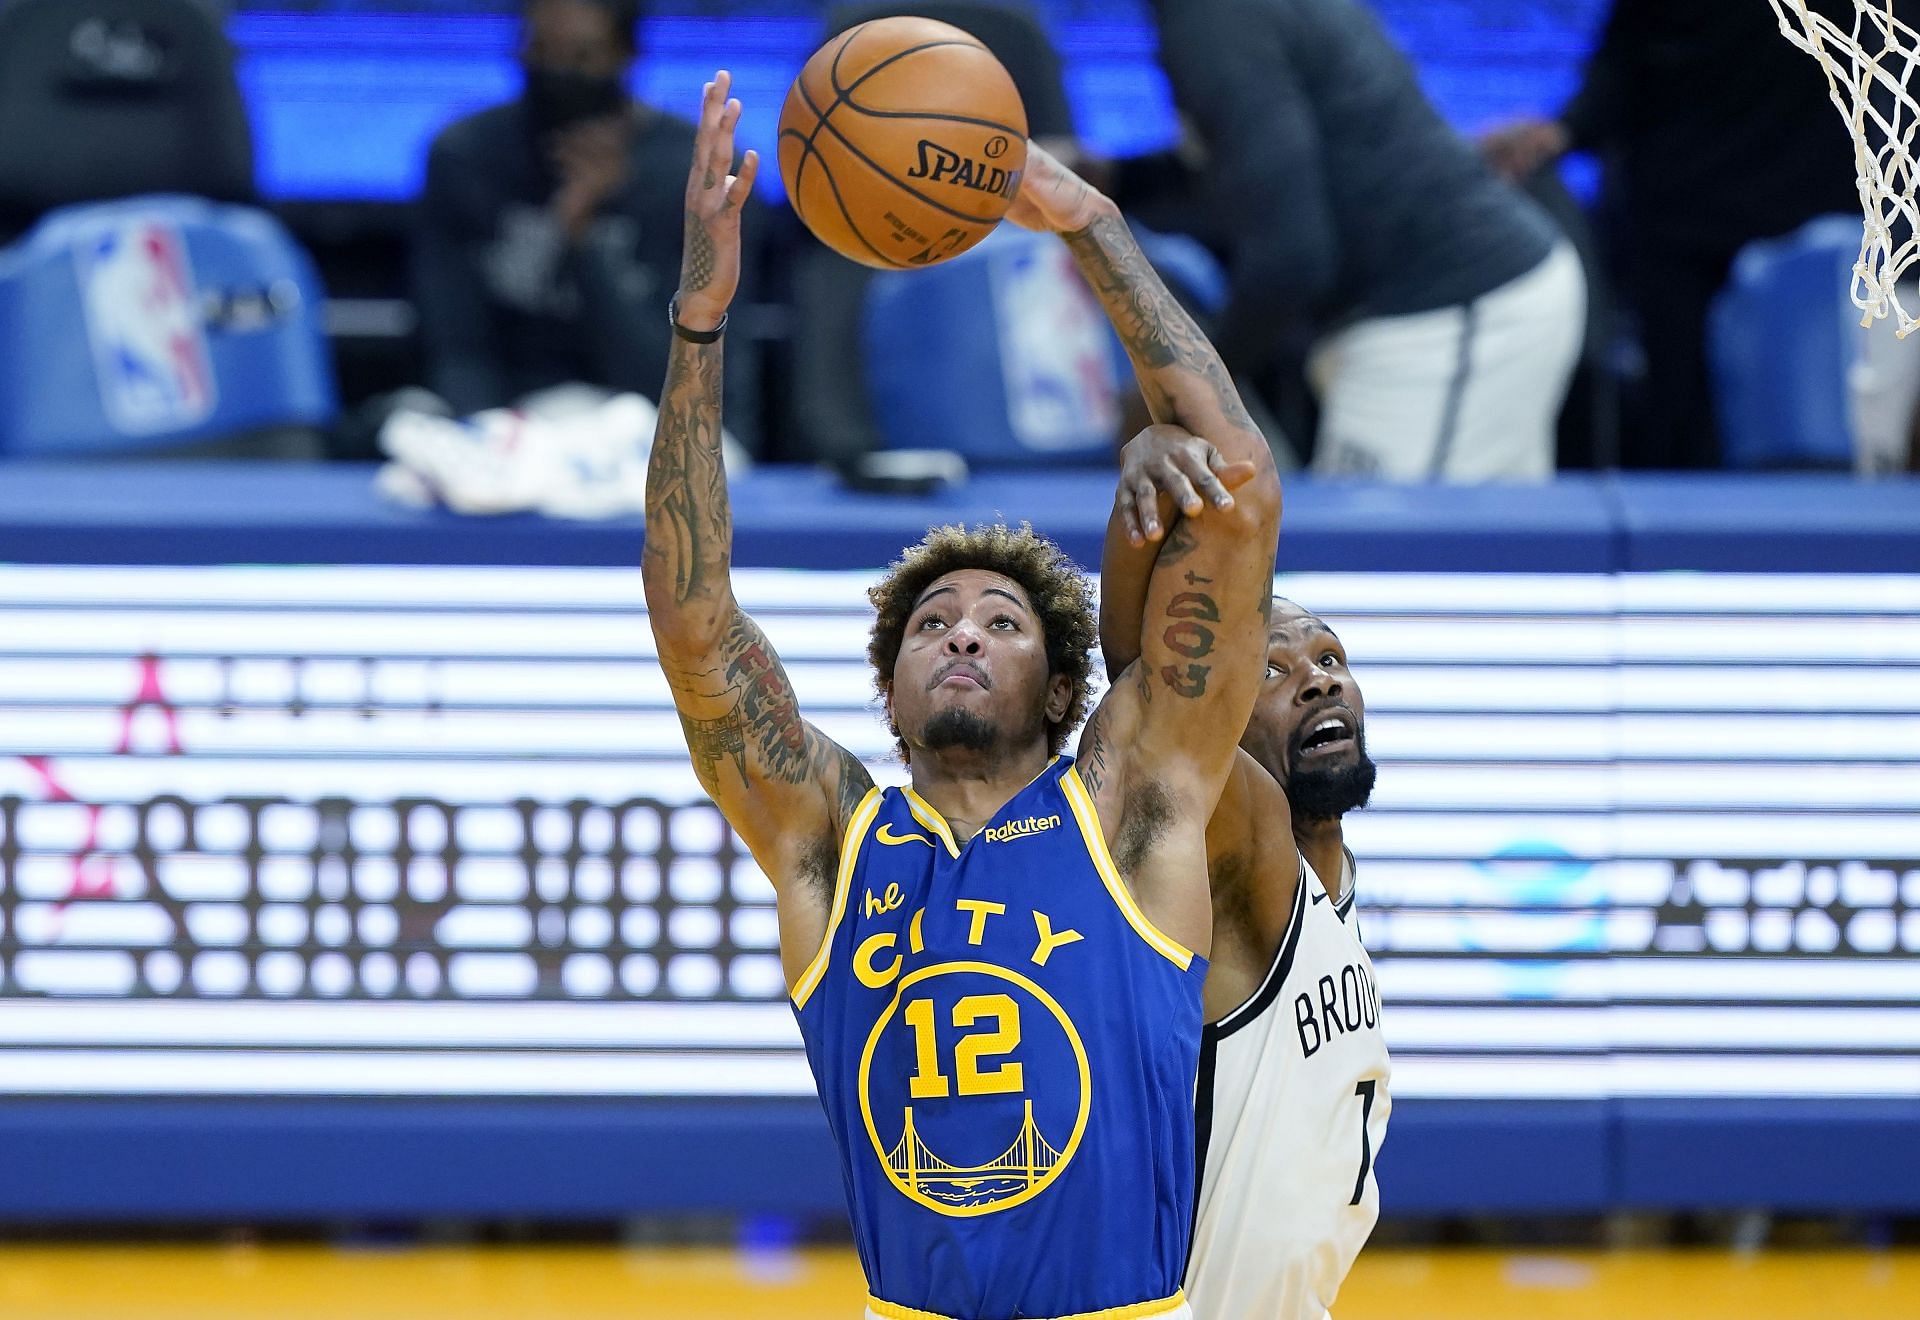 Kelly Oubre Jr. #12 of the Golden State Warriors battles for a rebound with Kevin Durant #7 of the Brooklyn Nets during the second half of an NBA basketball game at Chase Center on February 13, 2021 in San Francisco, California.